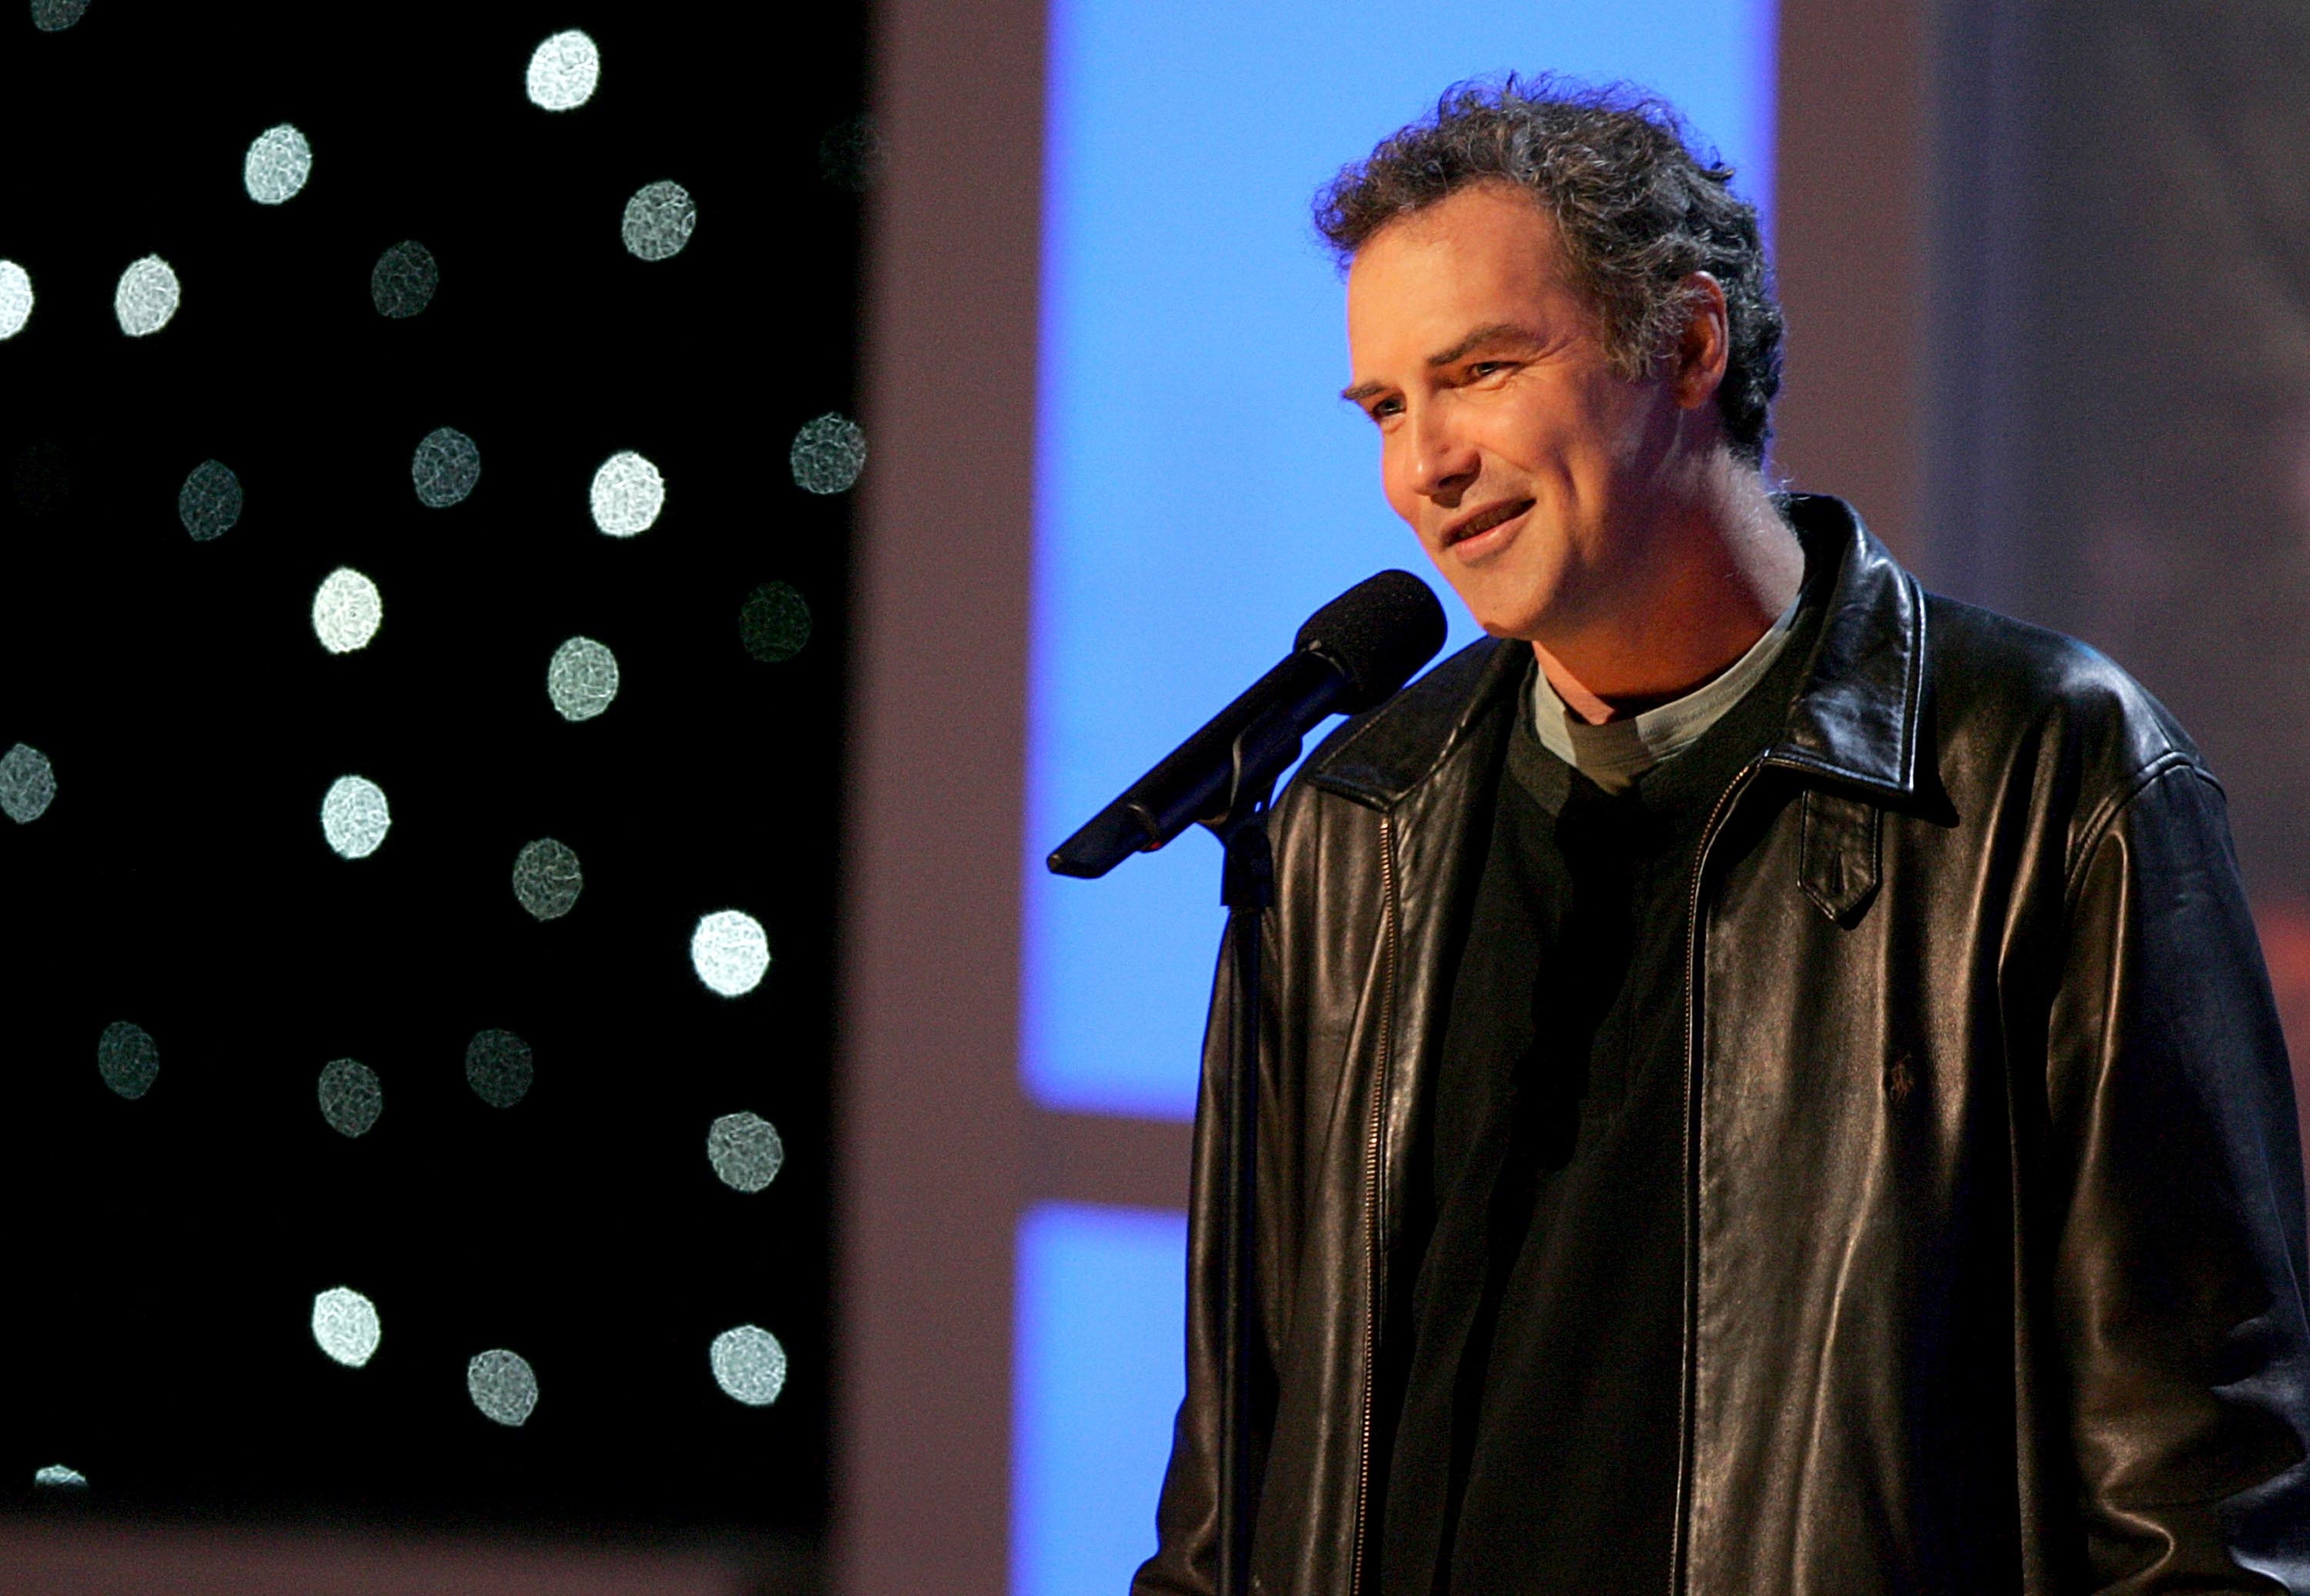 Norm Macdonald at a microphone in a leather jacket